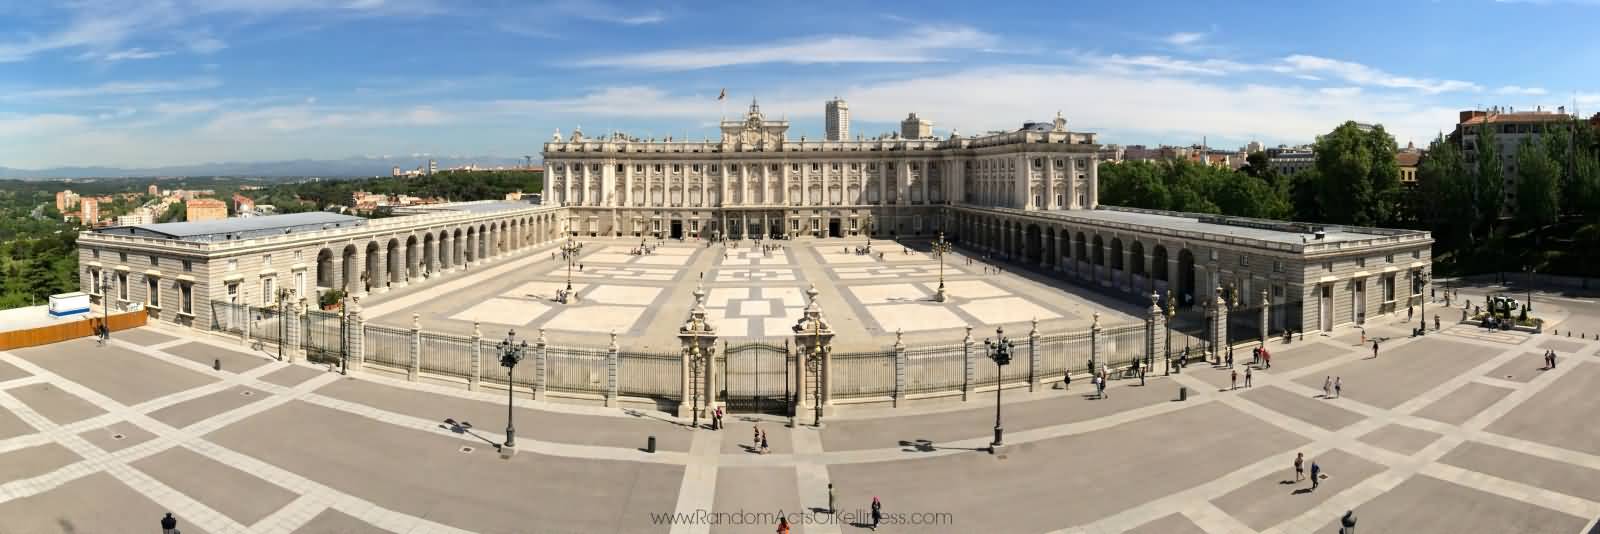 Panorama View Of The Royal Palace Of Madrid